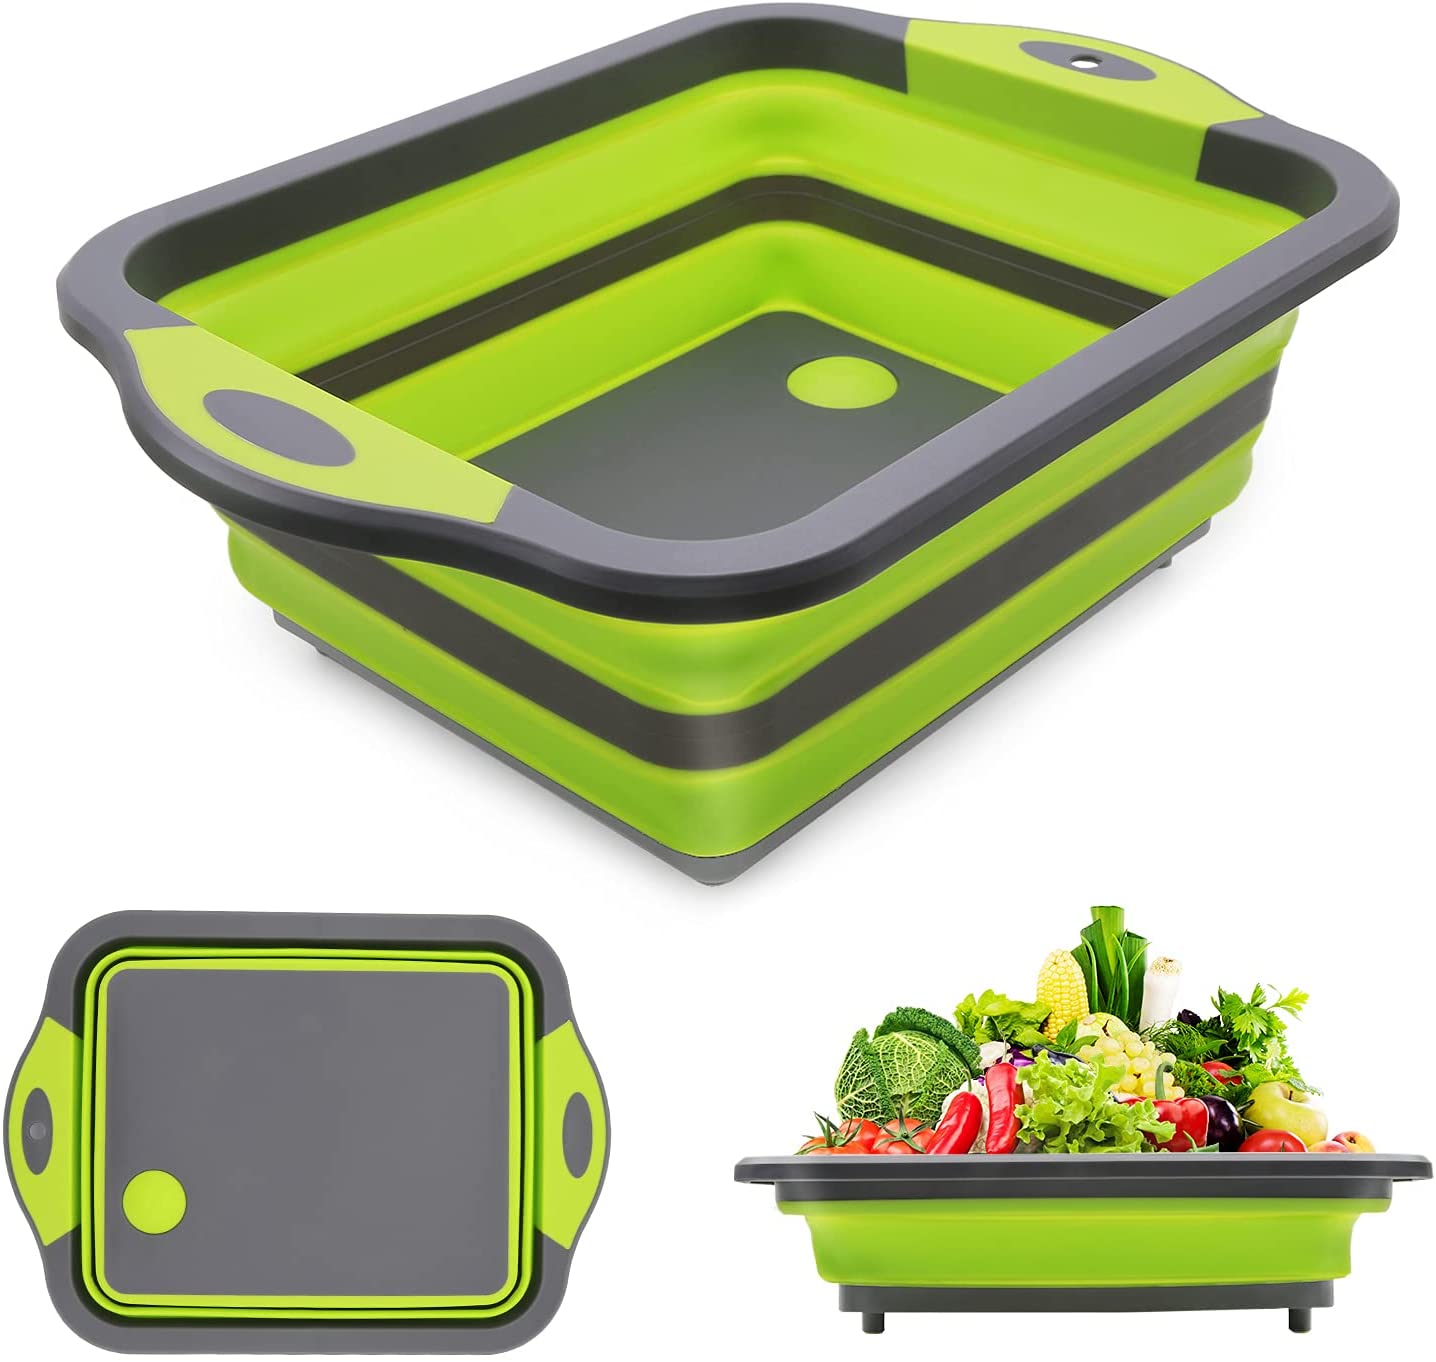 

Collapsible Cutting Board Chopping Board with Colander 3 in 1 Vegetable Washing Basket Silicone Dish Tub for Kitchen Outdoor Camping Picnic BBQ Prep